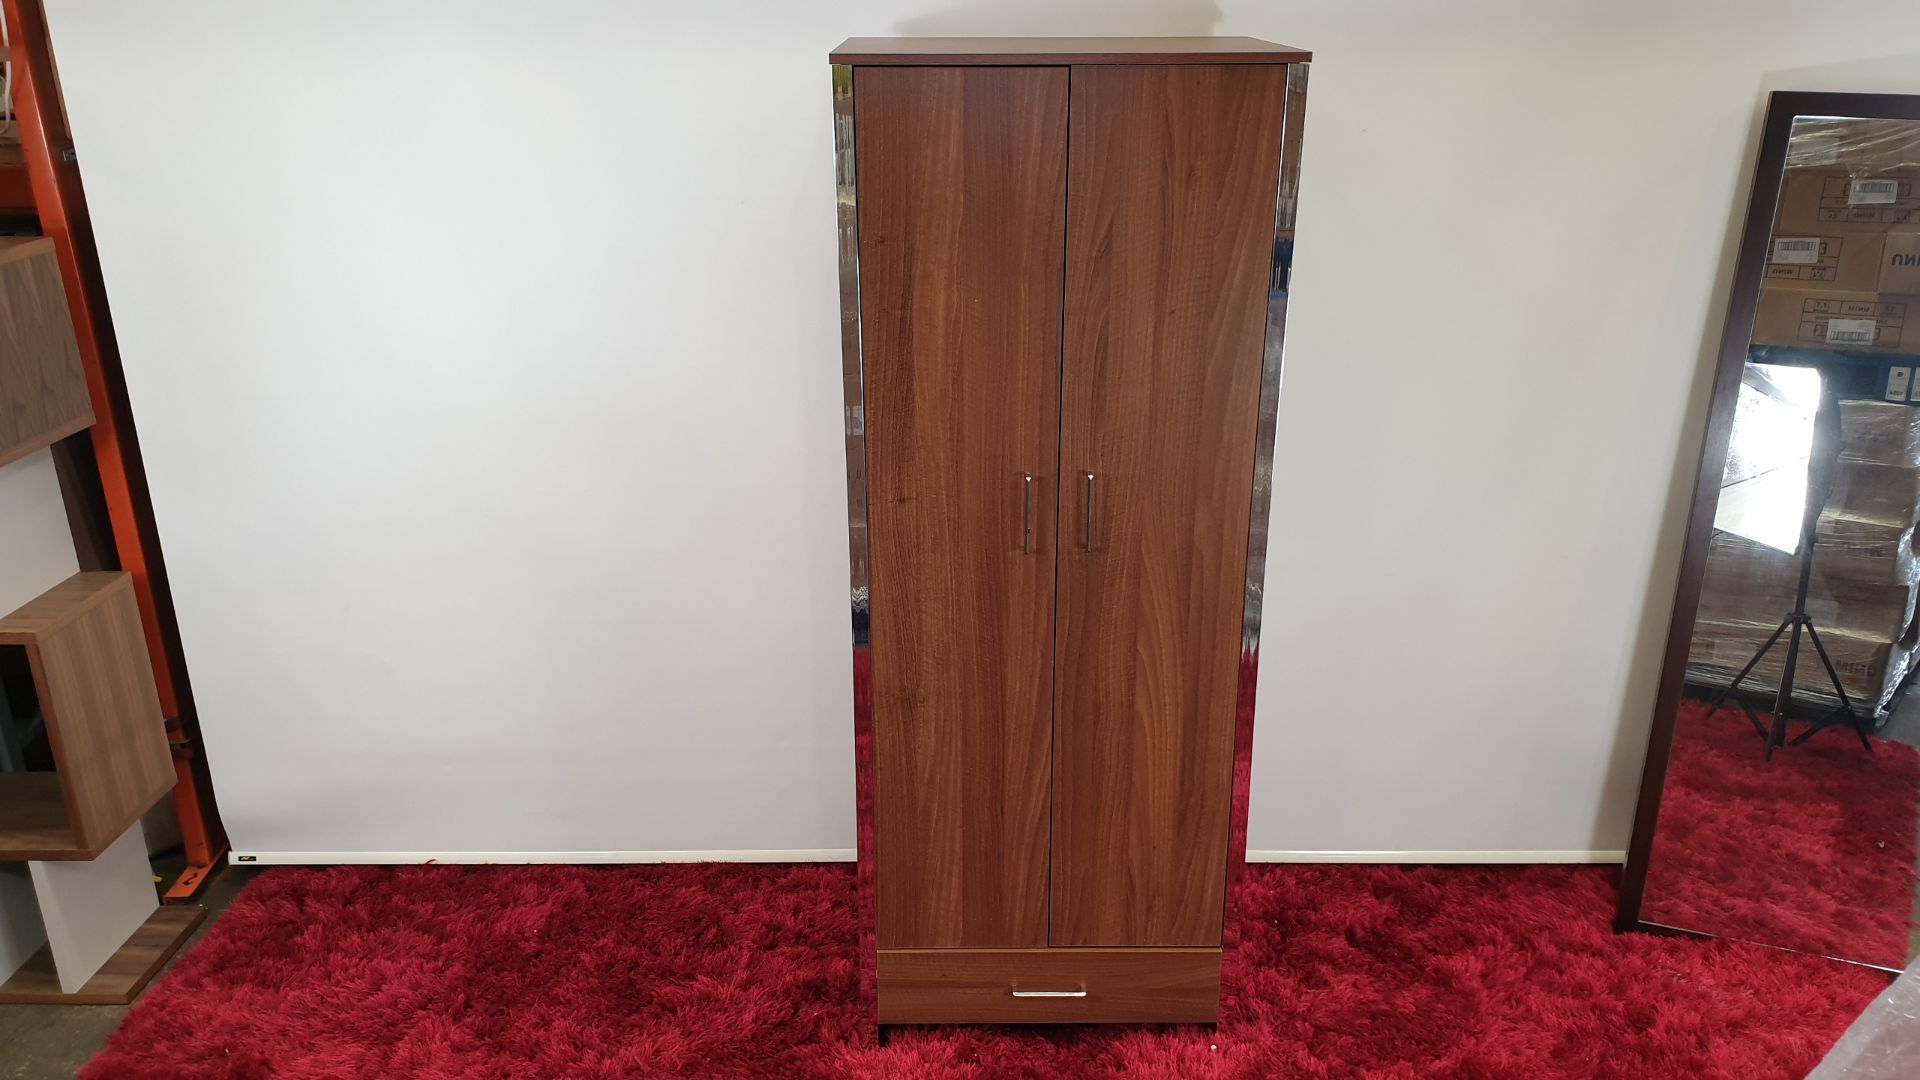 4 X BROWN 2 DOOR 1 ROBE WITH SILVER EDGE WARDROBES - BRAND NEW AND BOXED